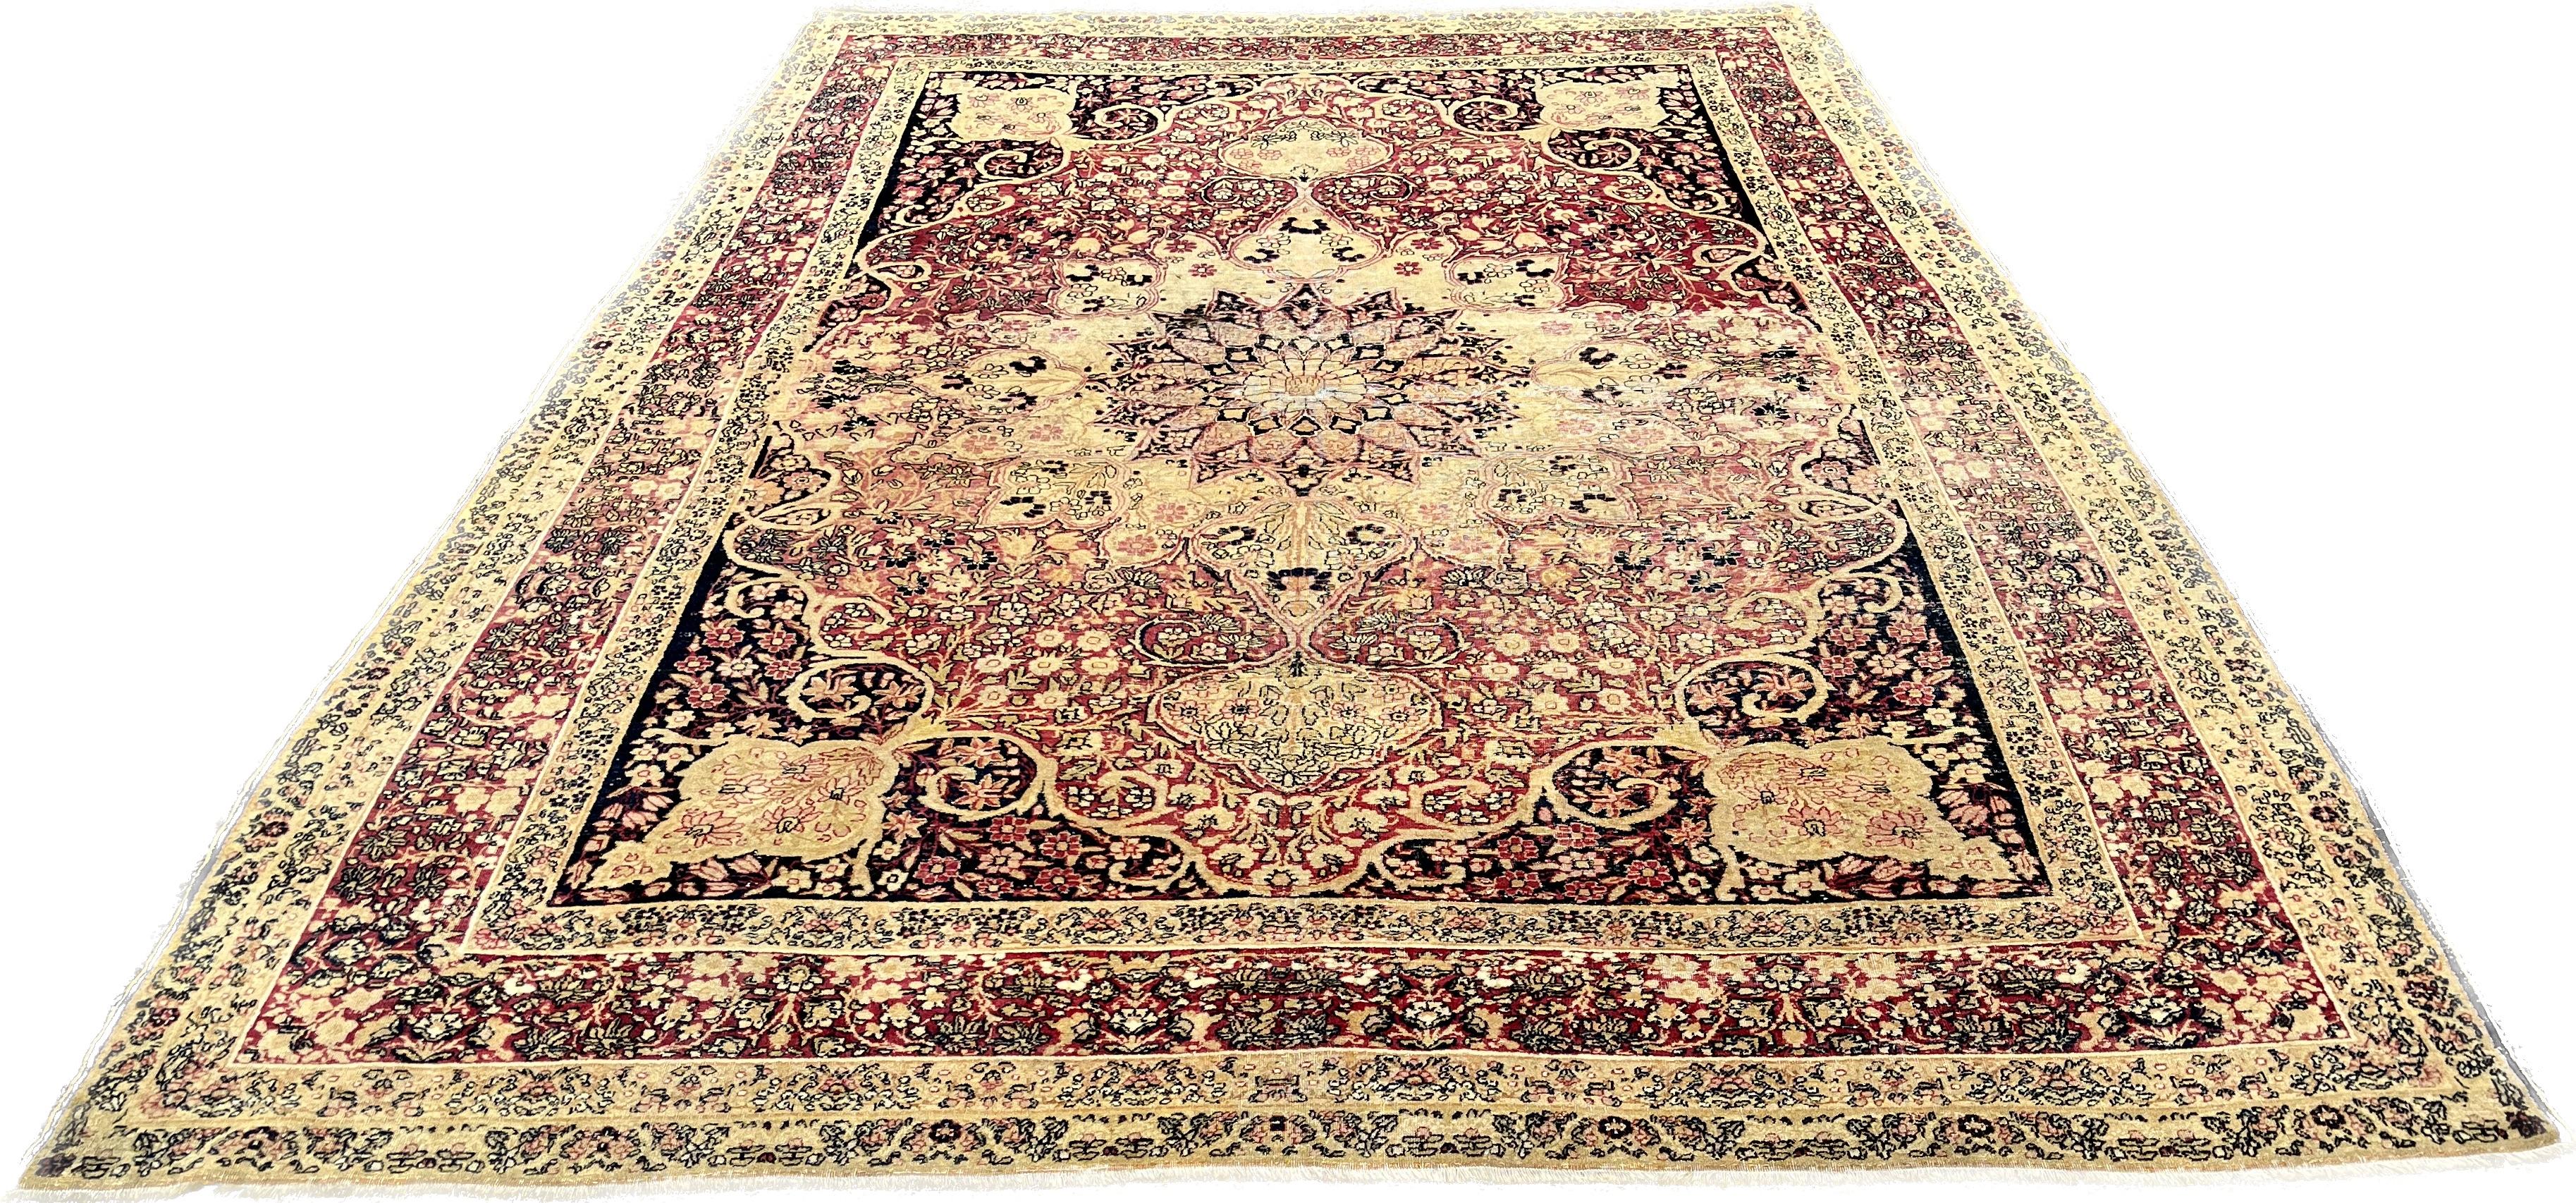 Wool Antique Rug  Kirman Raver. Late 19th For Sale